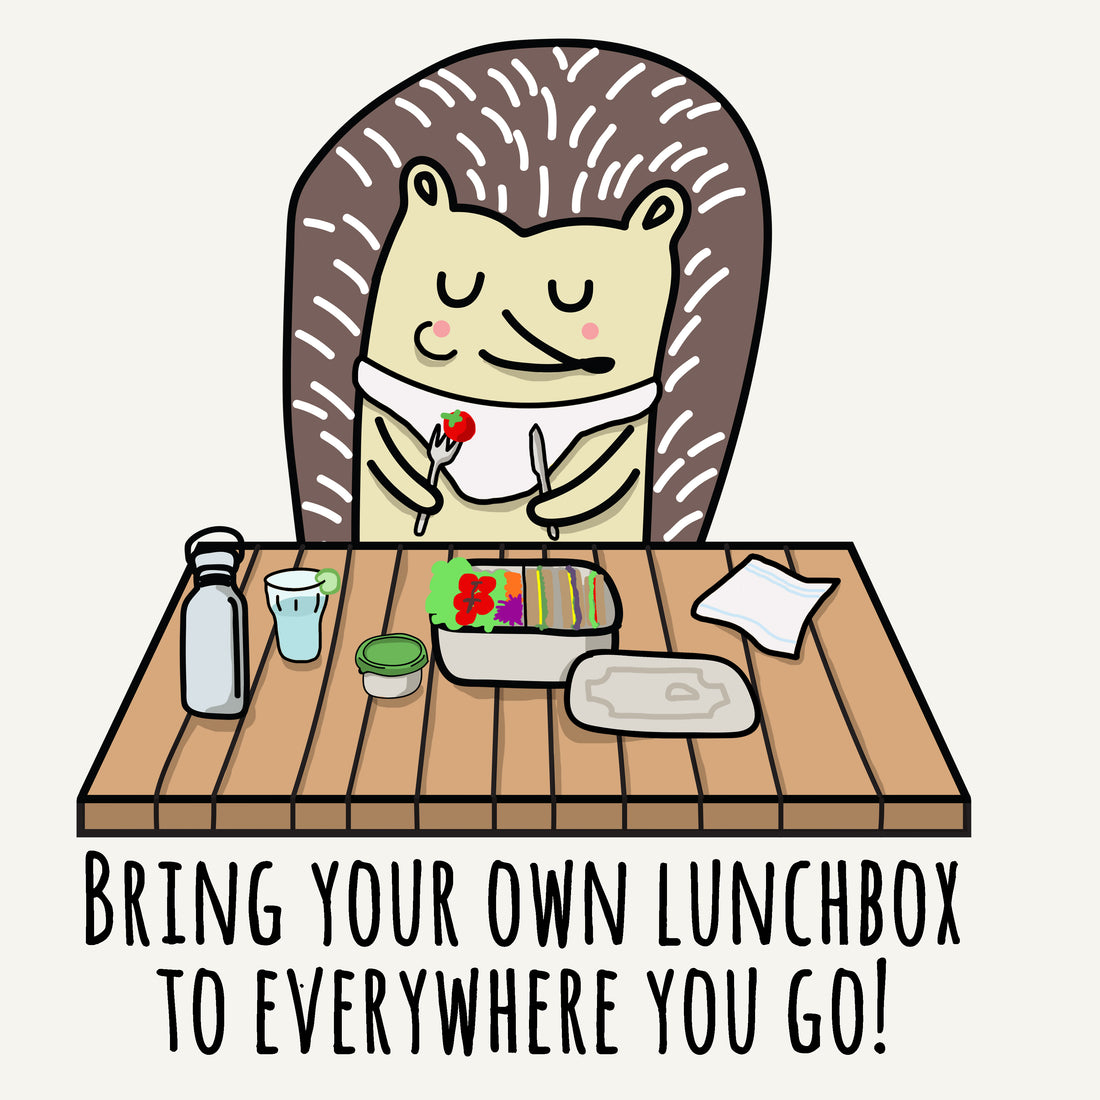 Mindful Mintie Says: Bring Your Lunchbox Everywhere You Go